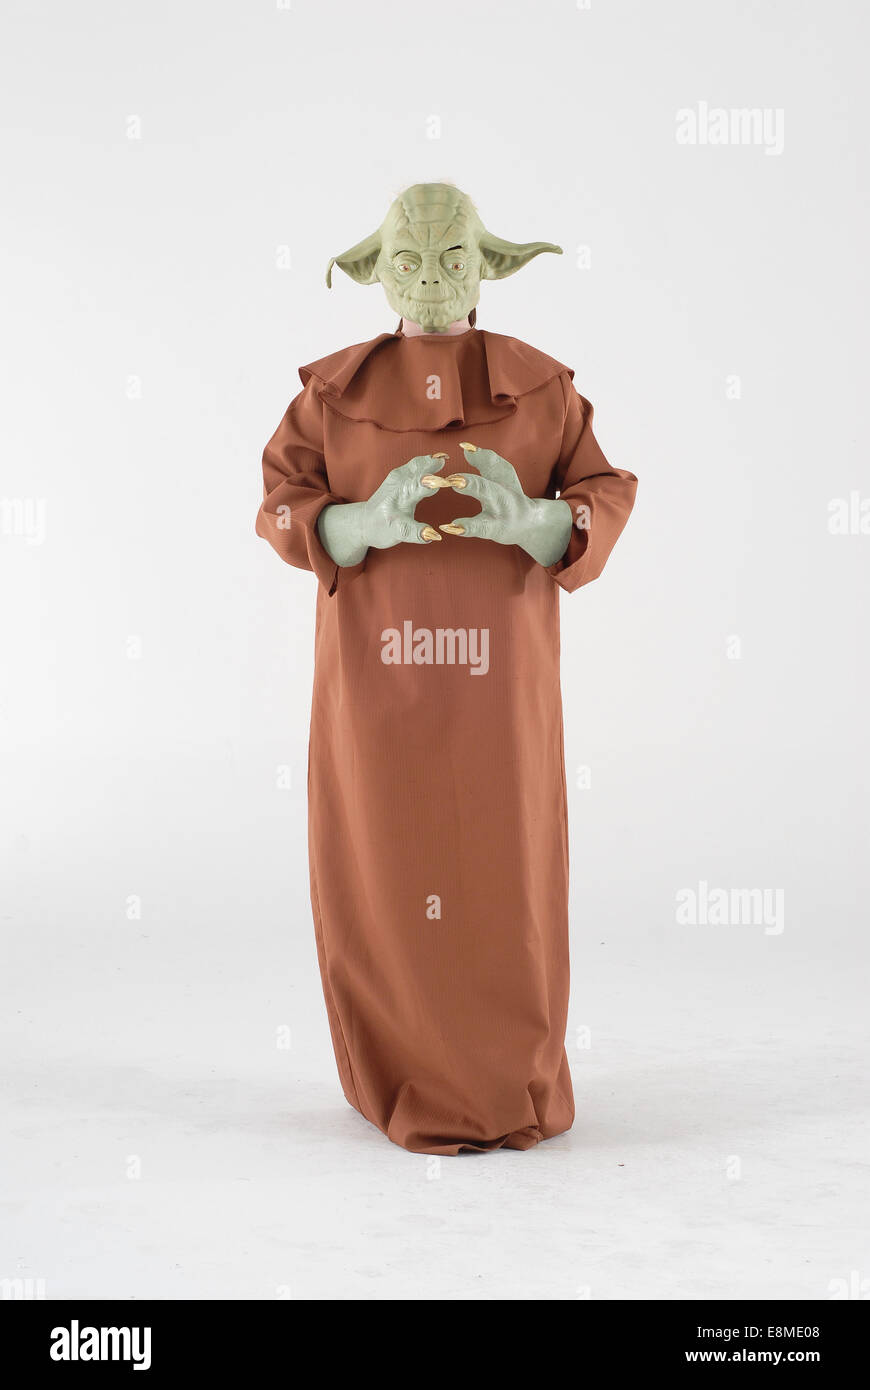 Woman in fancy dress comedy costume in a yoda outfit from starwars the science fiction film Stock Photo